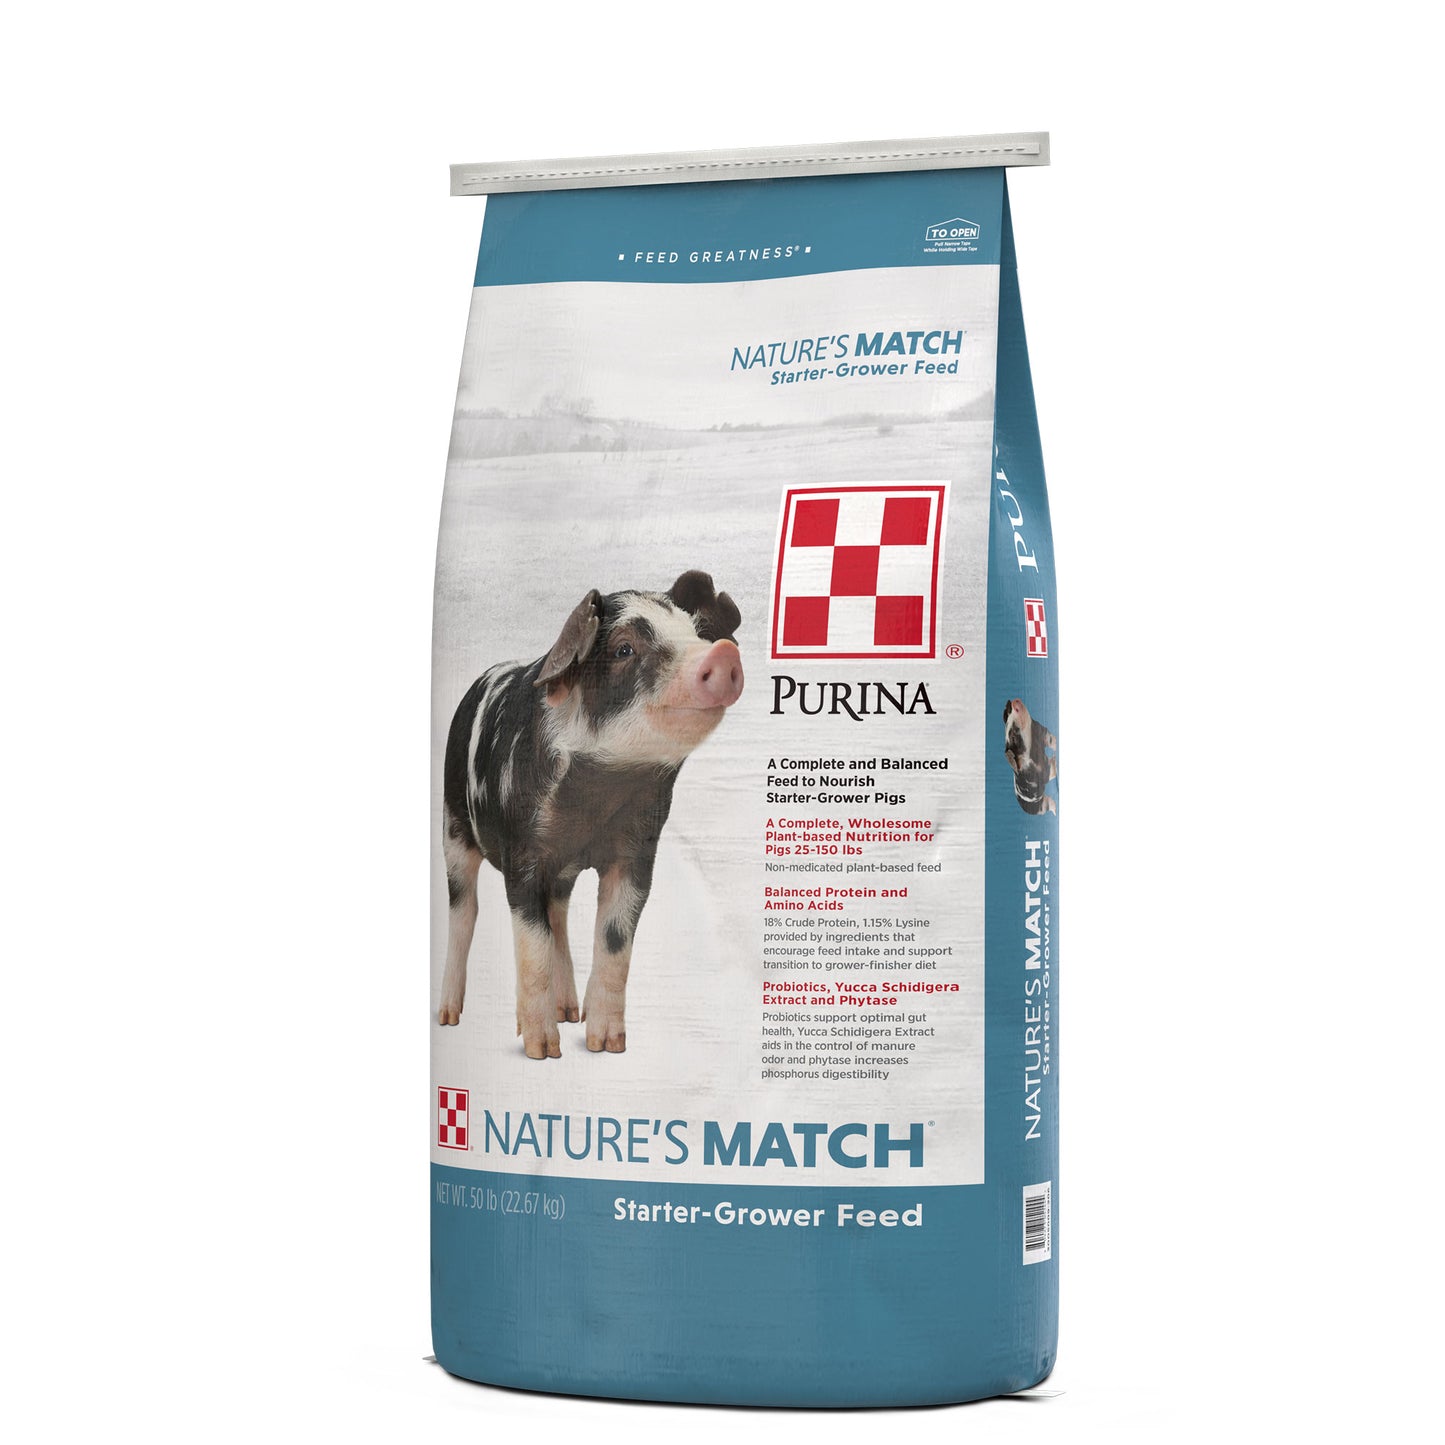 Right Angle of Nature's Match Starter-Grower 50 Pound Bag